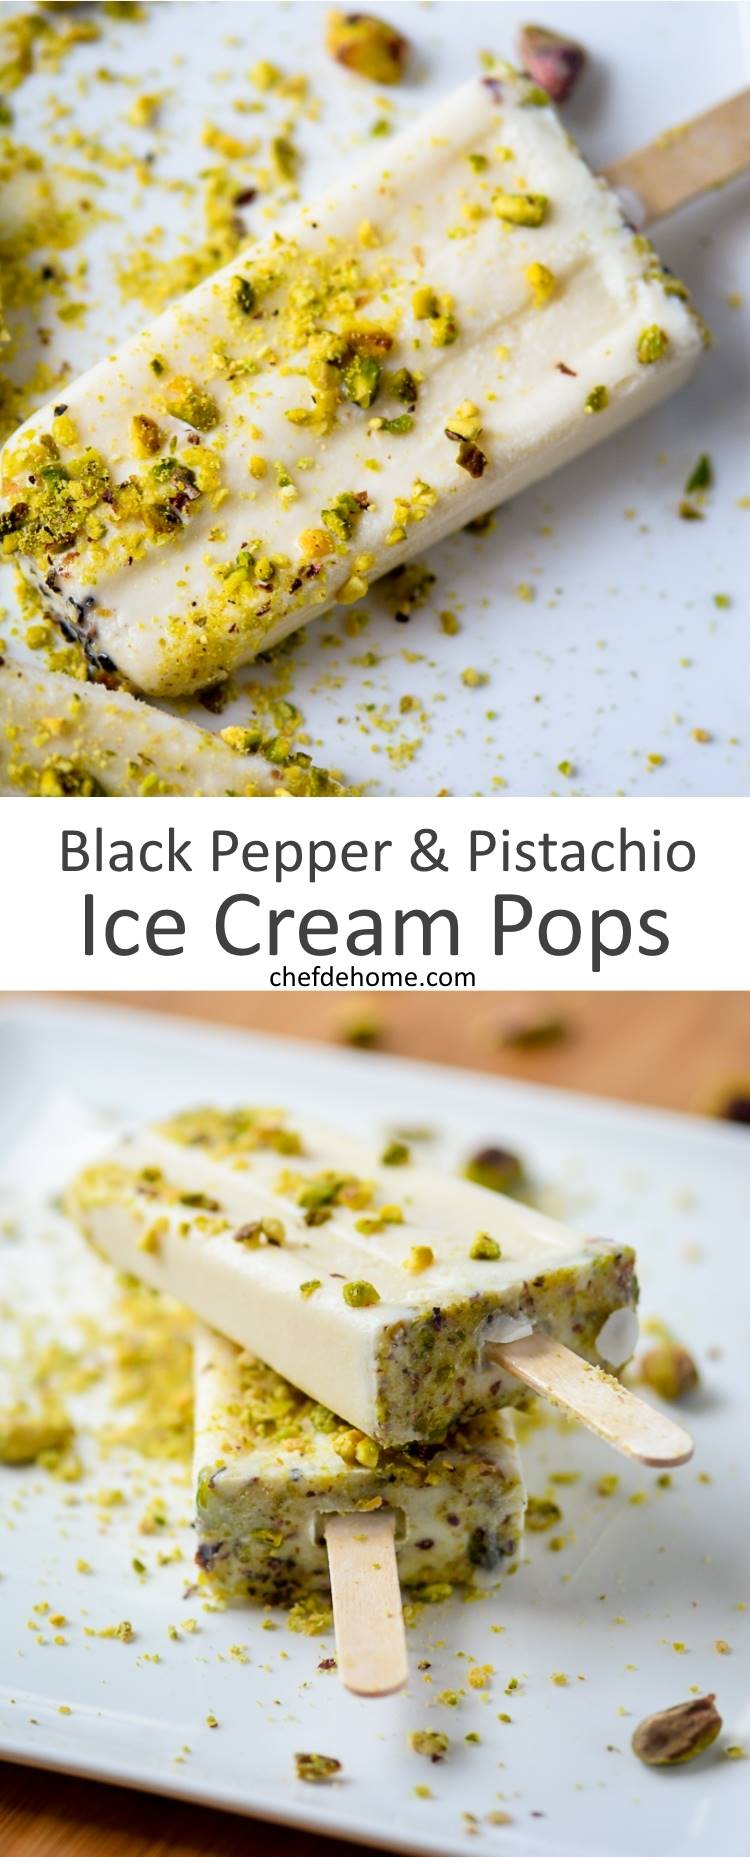 Frozen Sweet and Peppery Low-Calorie 5-ingredients Pistachio Ice Cream Pops | chefdehome.com